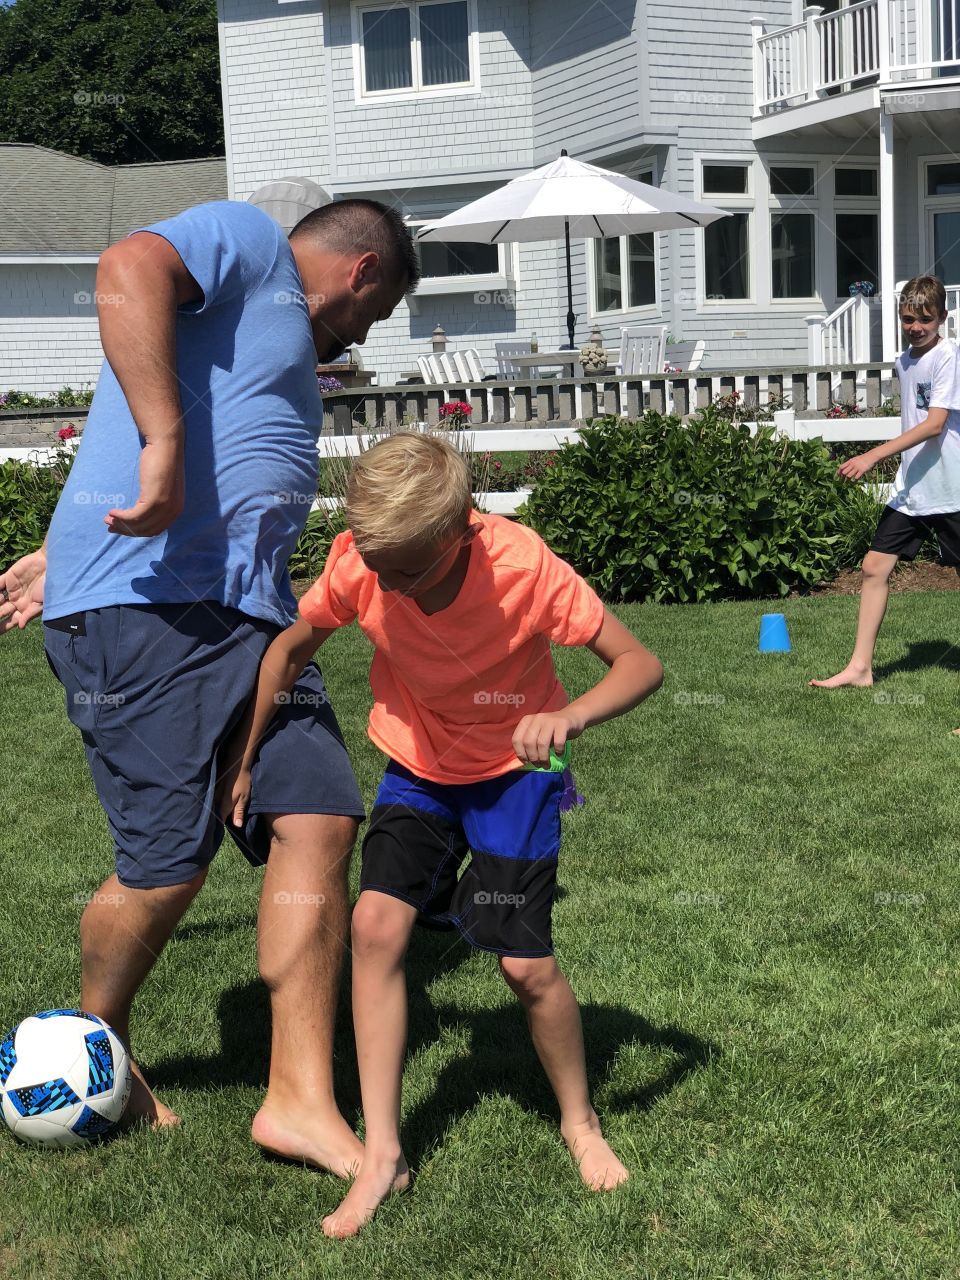 Family soccer competition! 